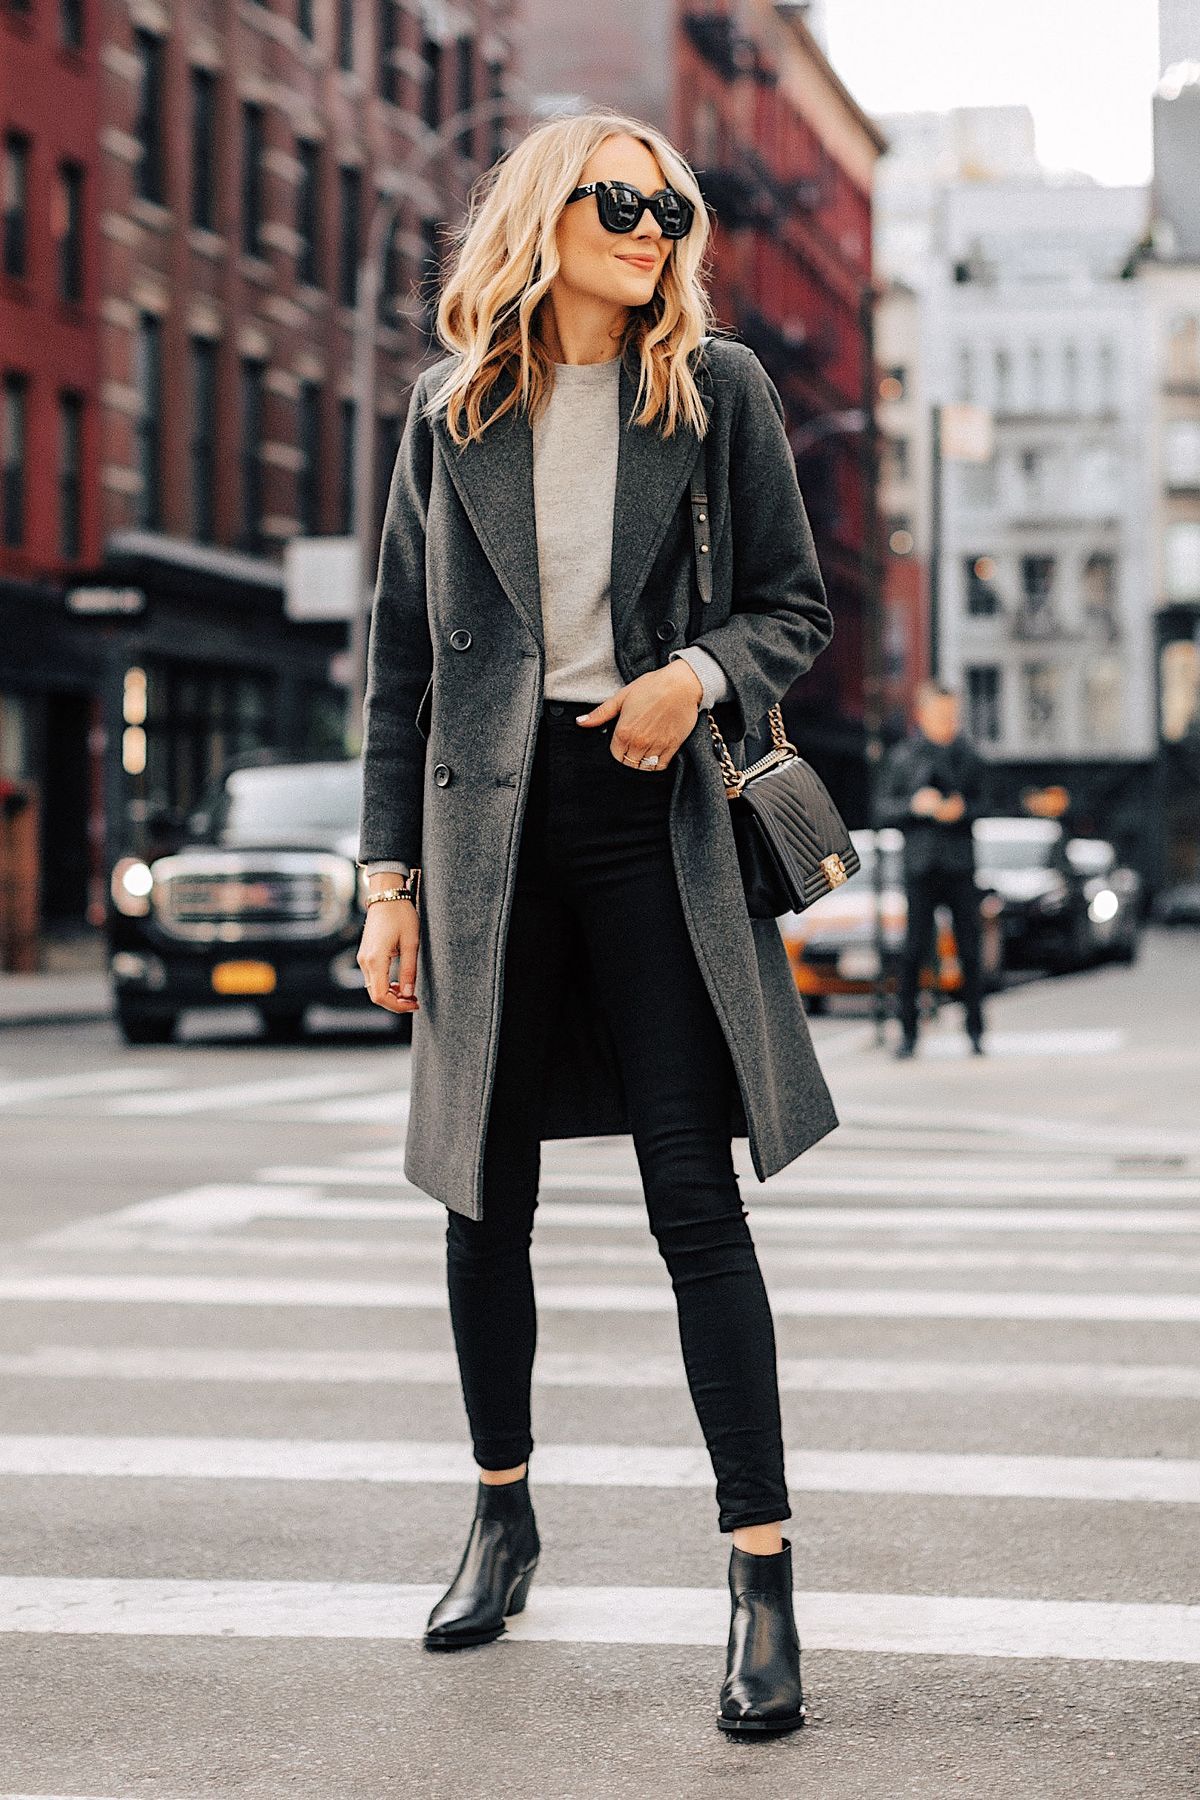 The Classic Winter Outfit From Everlane I Wore in NYC | Fashion Jackson - The Classic Winter Outfit From Everlane I Wore in NYC | Fashion Jackson -   new york style Winter